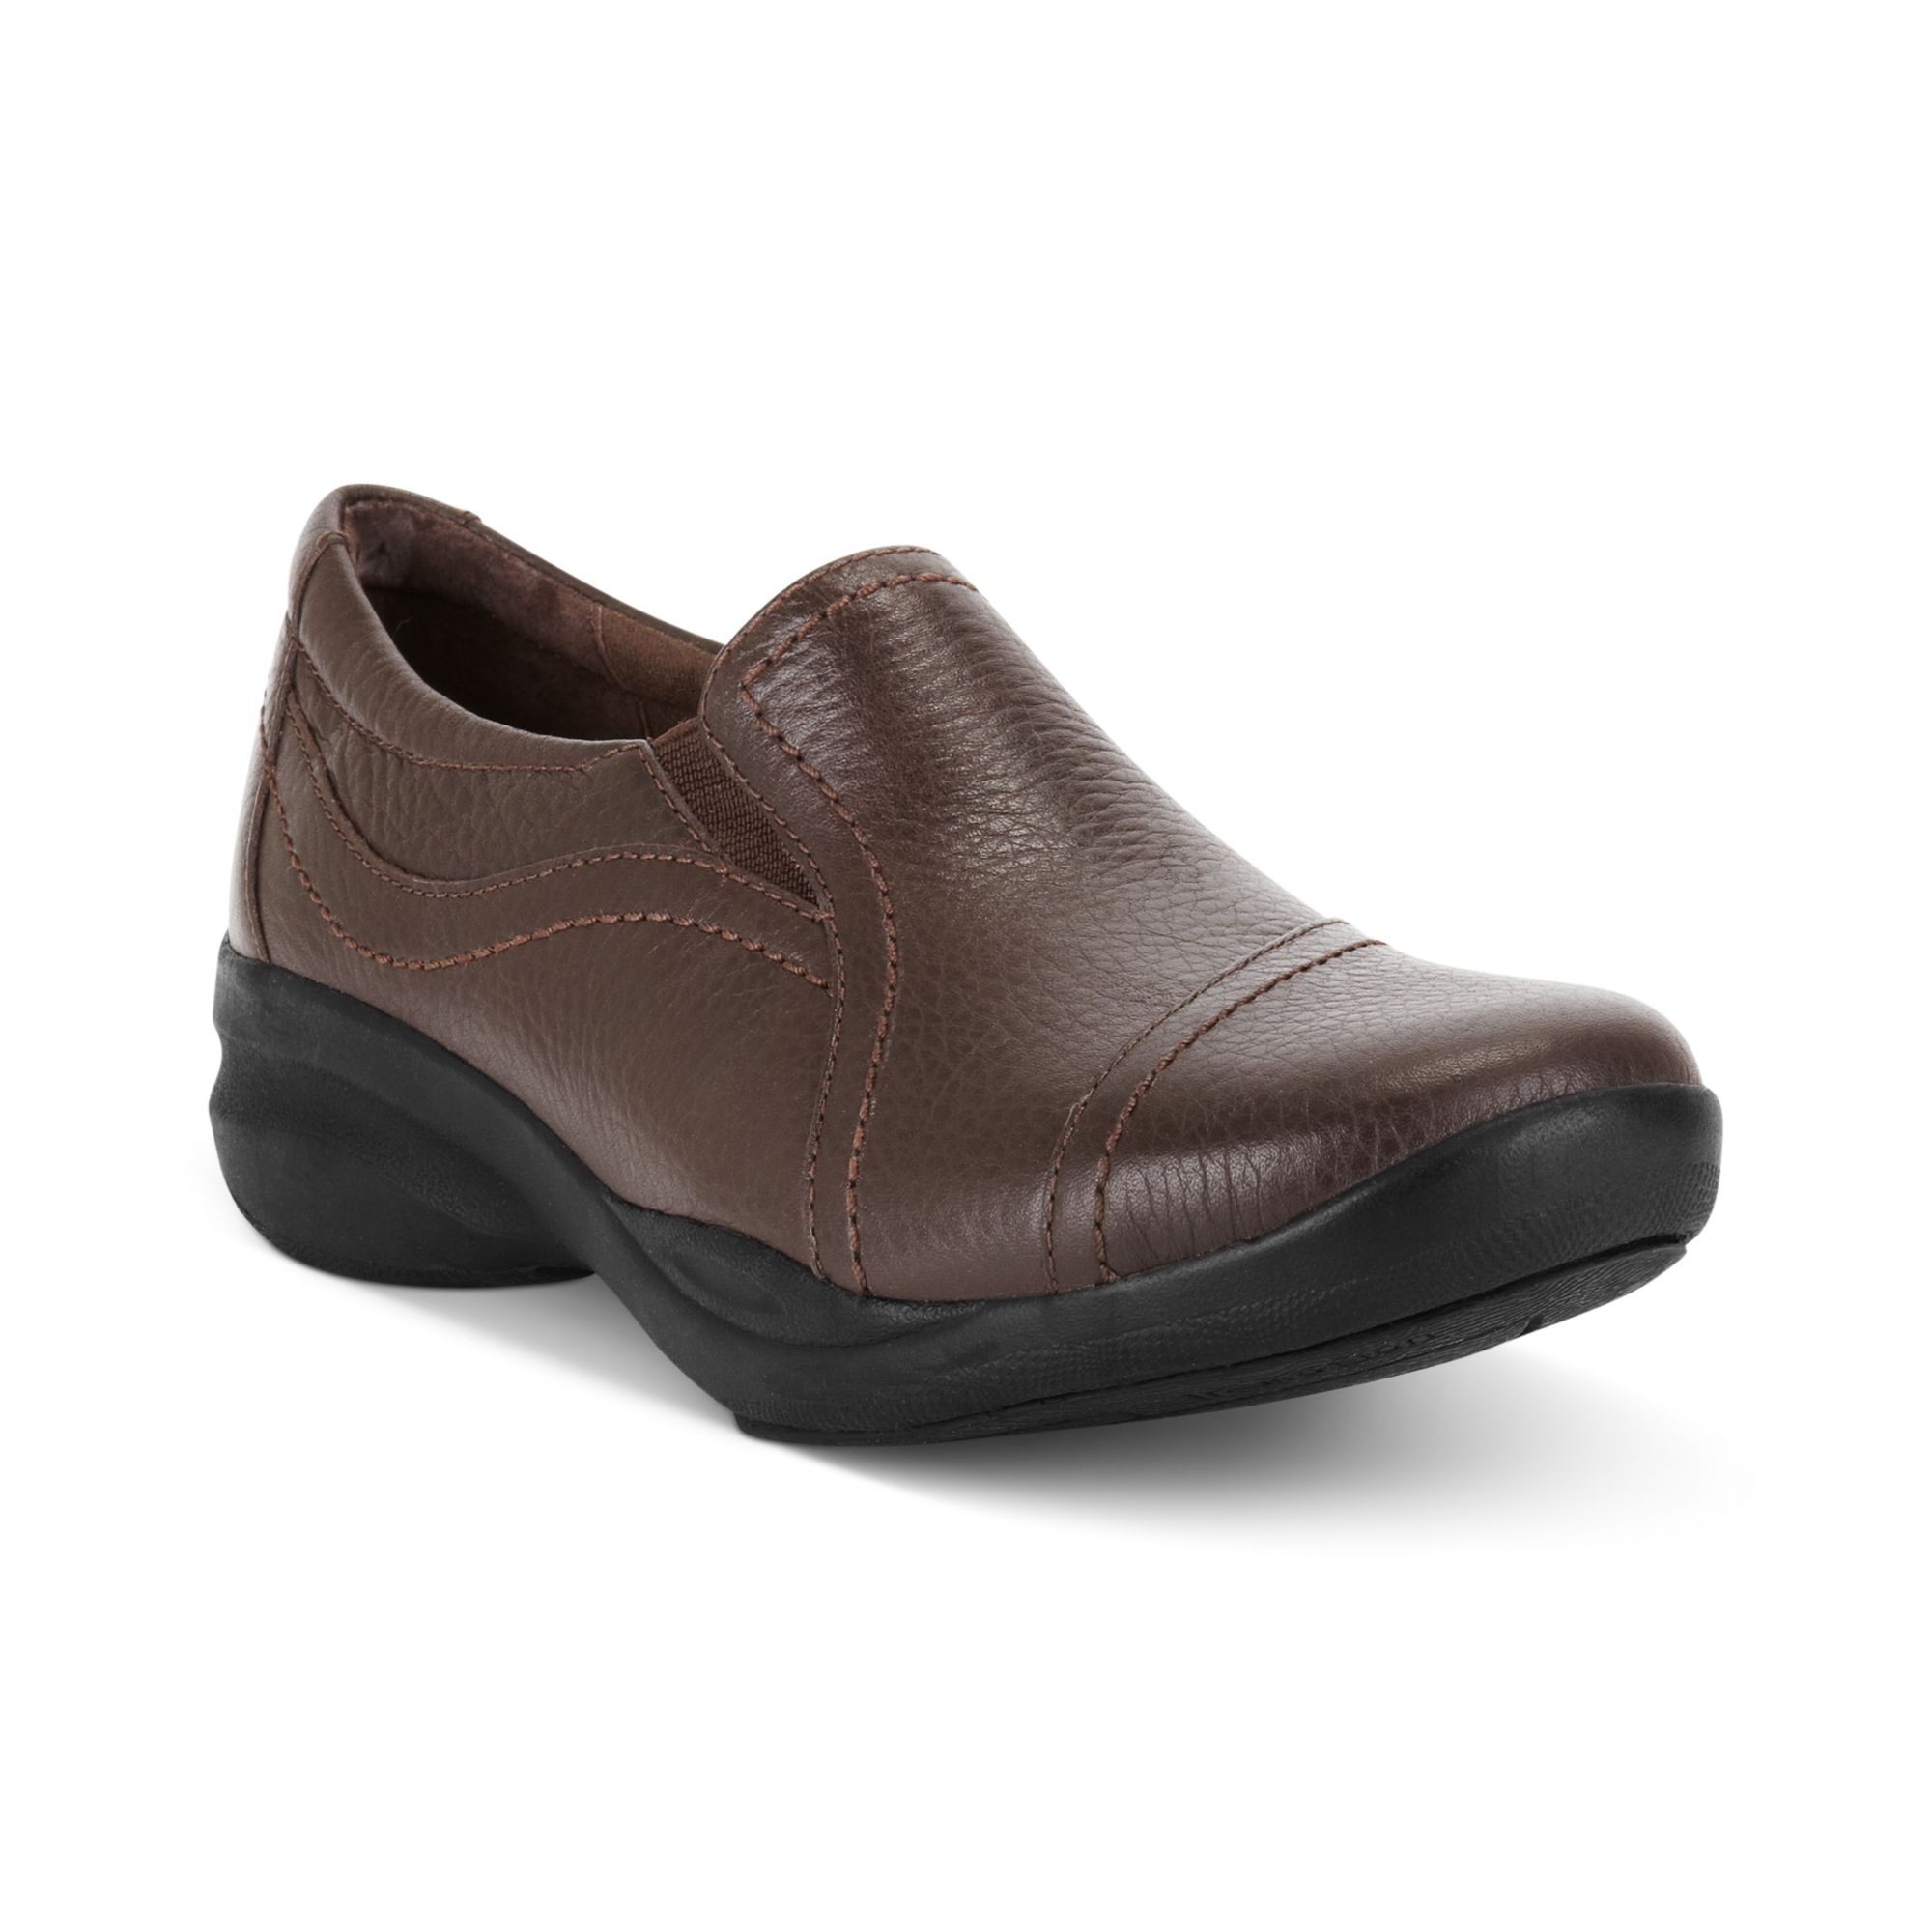 clarks in motion shoes